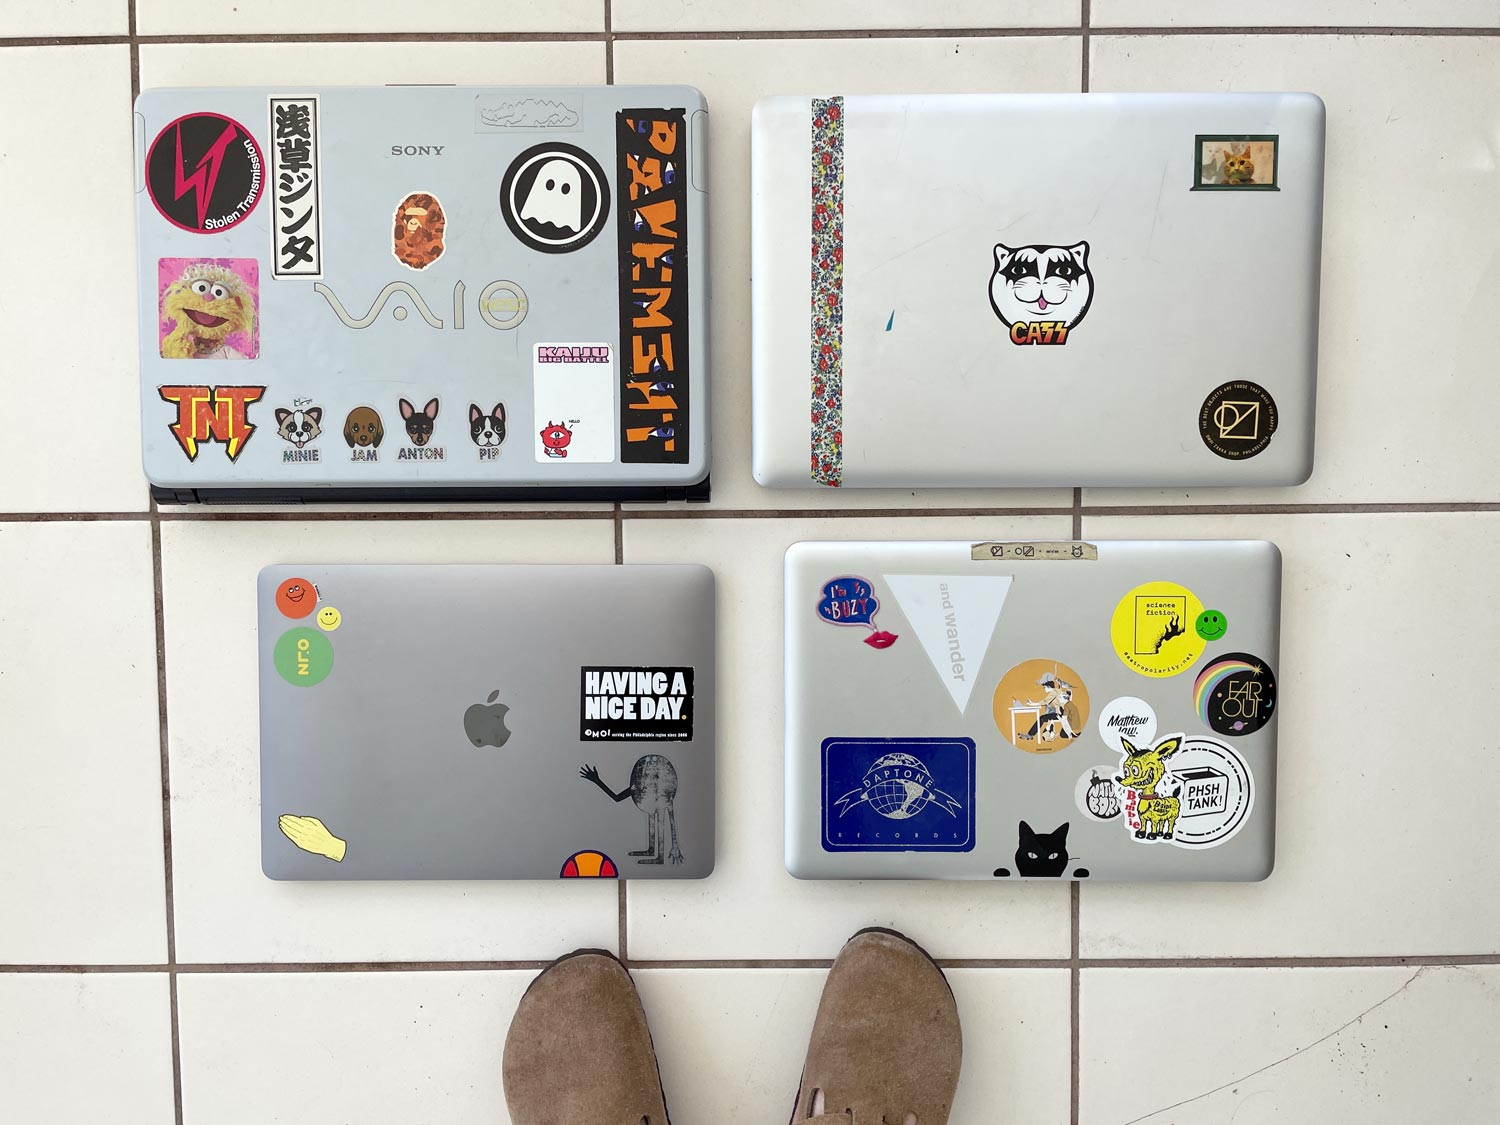 Which of Liz's laptop stickers do you remember seeing when you came by for a visit?